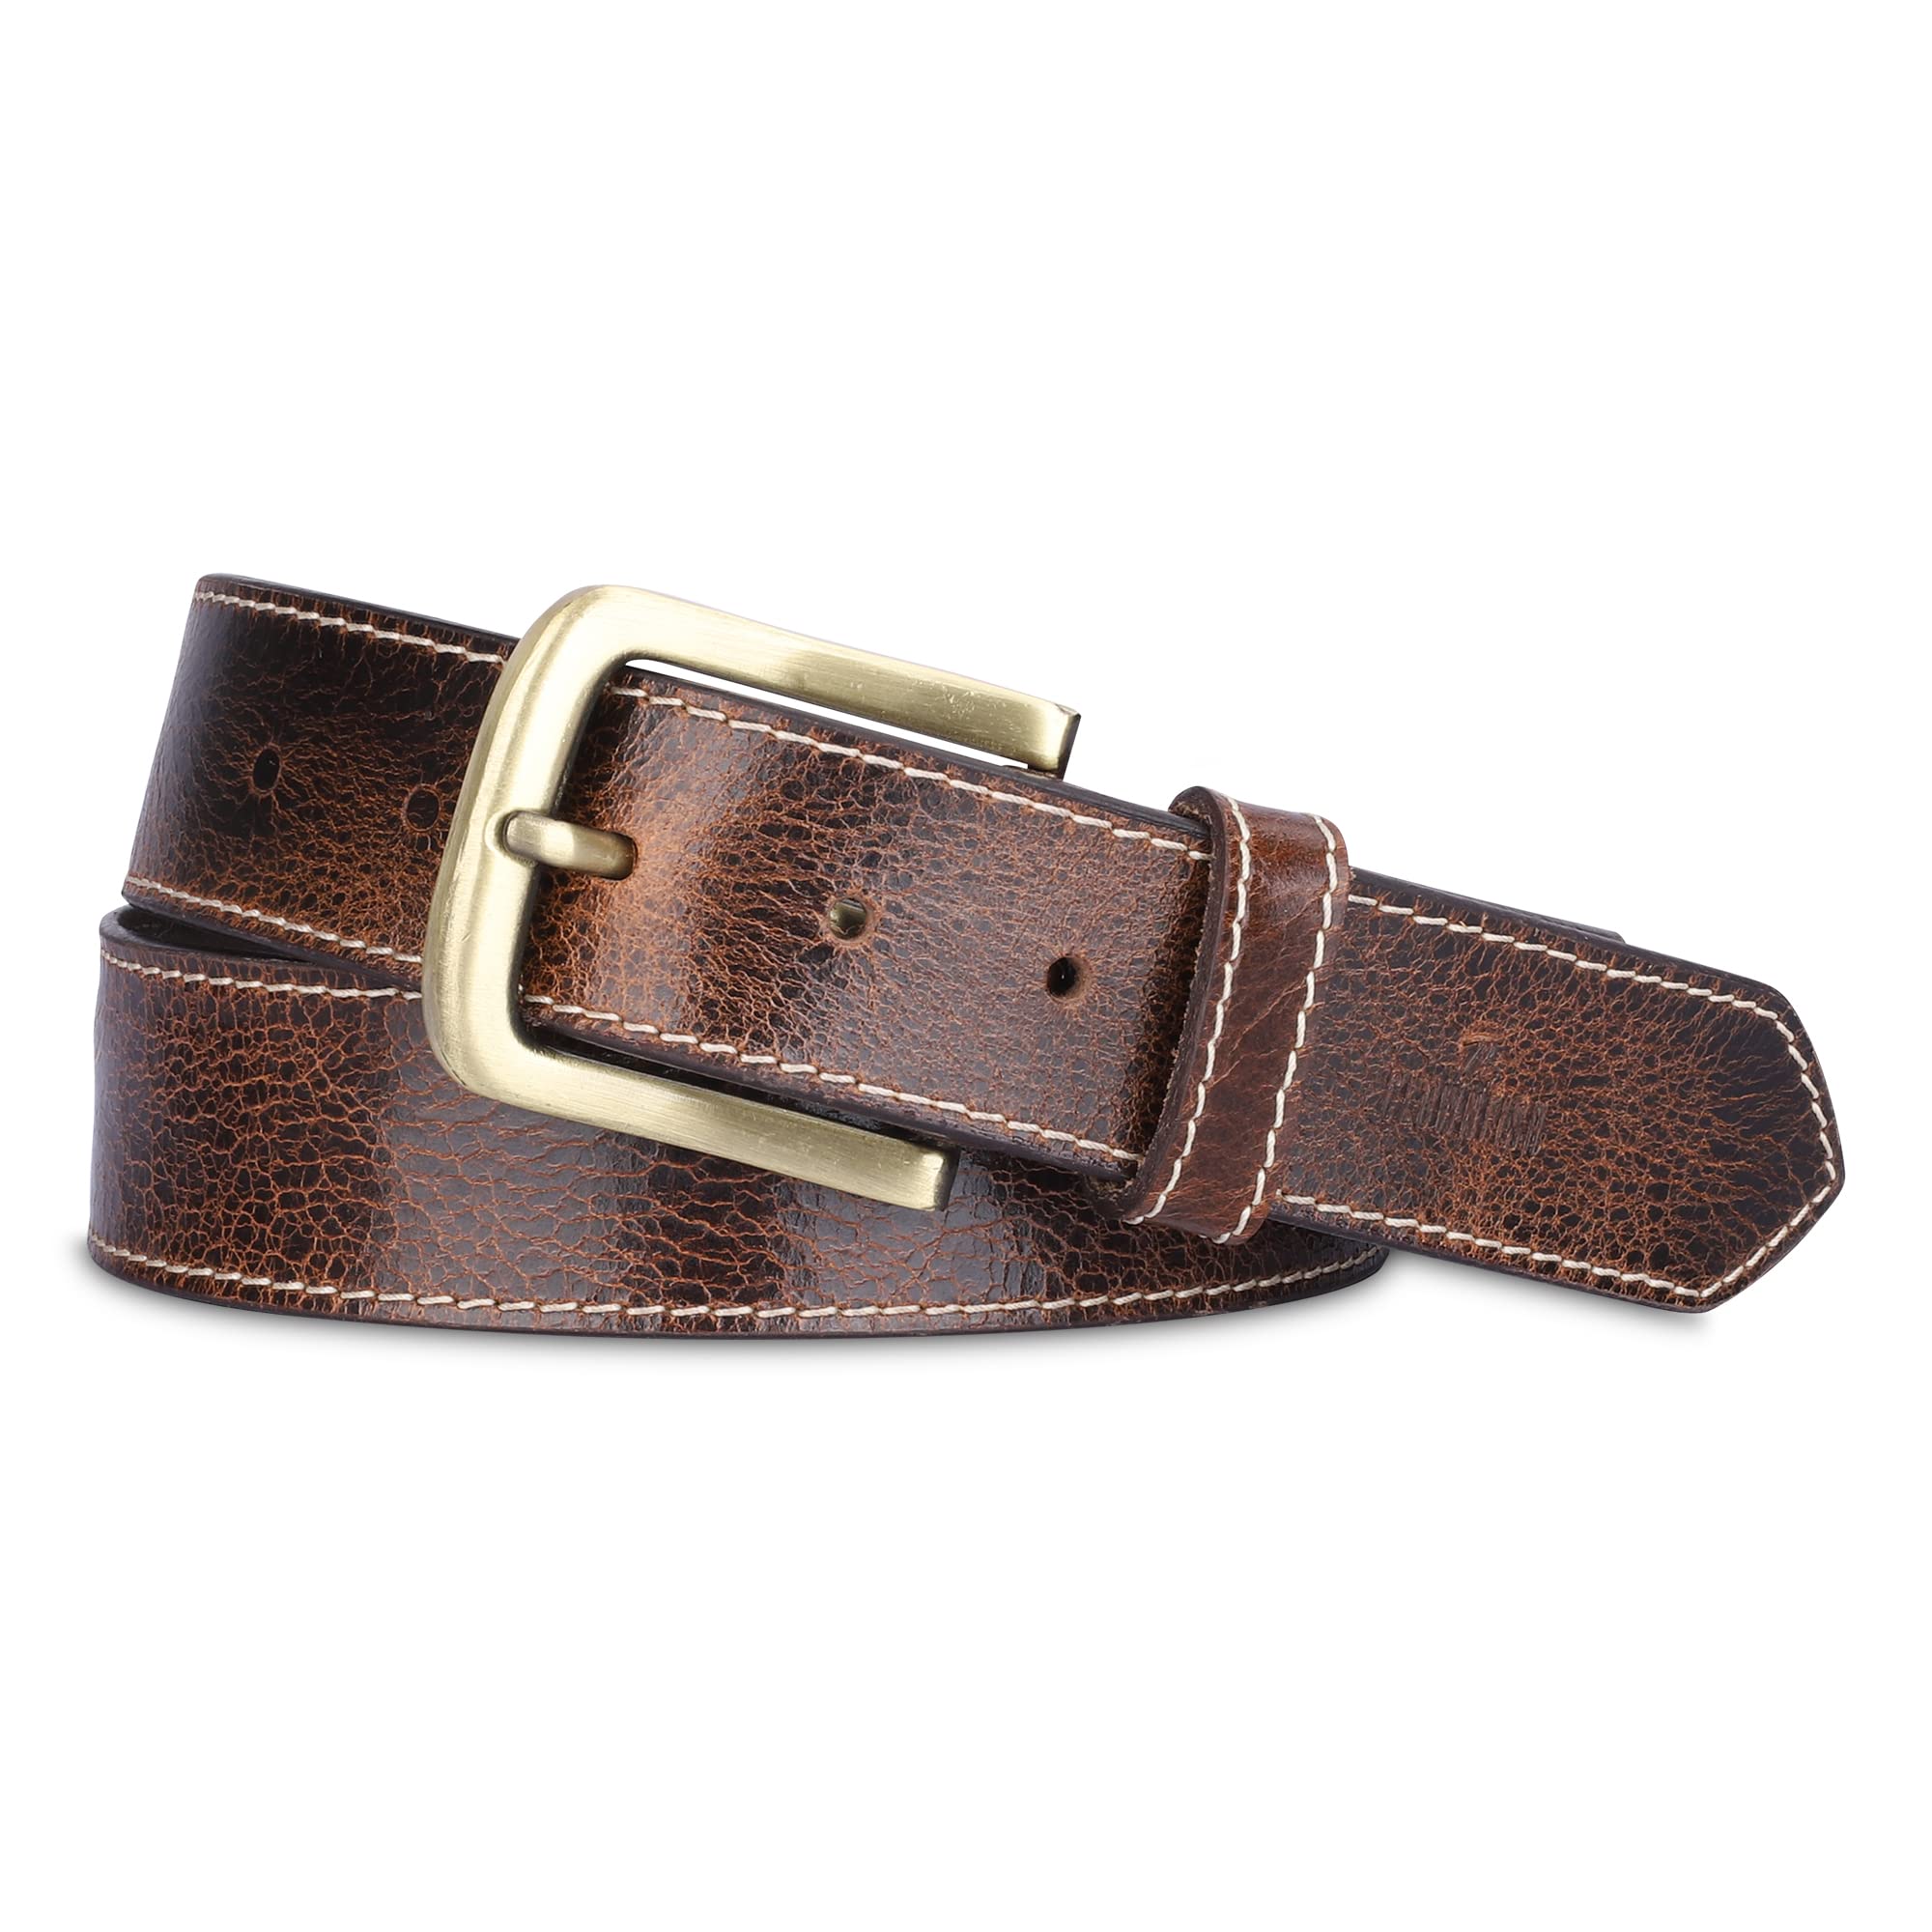 THE CLOWNFISH Men's Genuine Leather Belts - Brown (Size-32 inches)